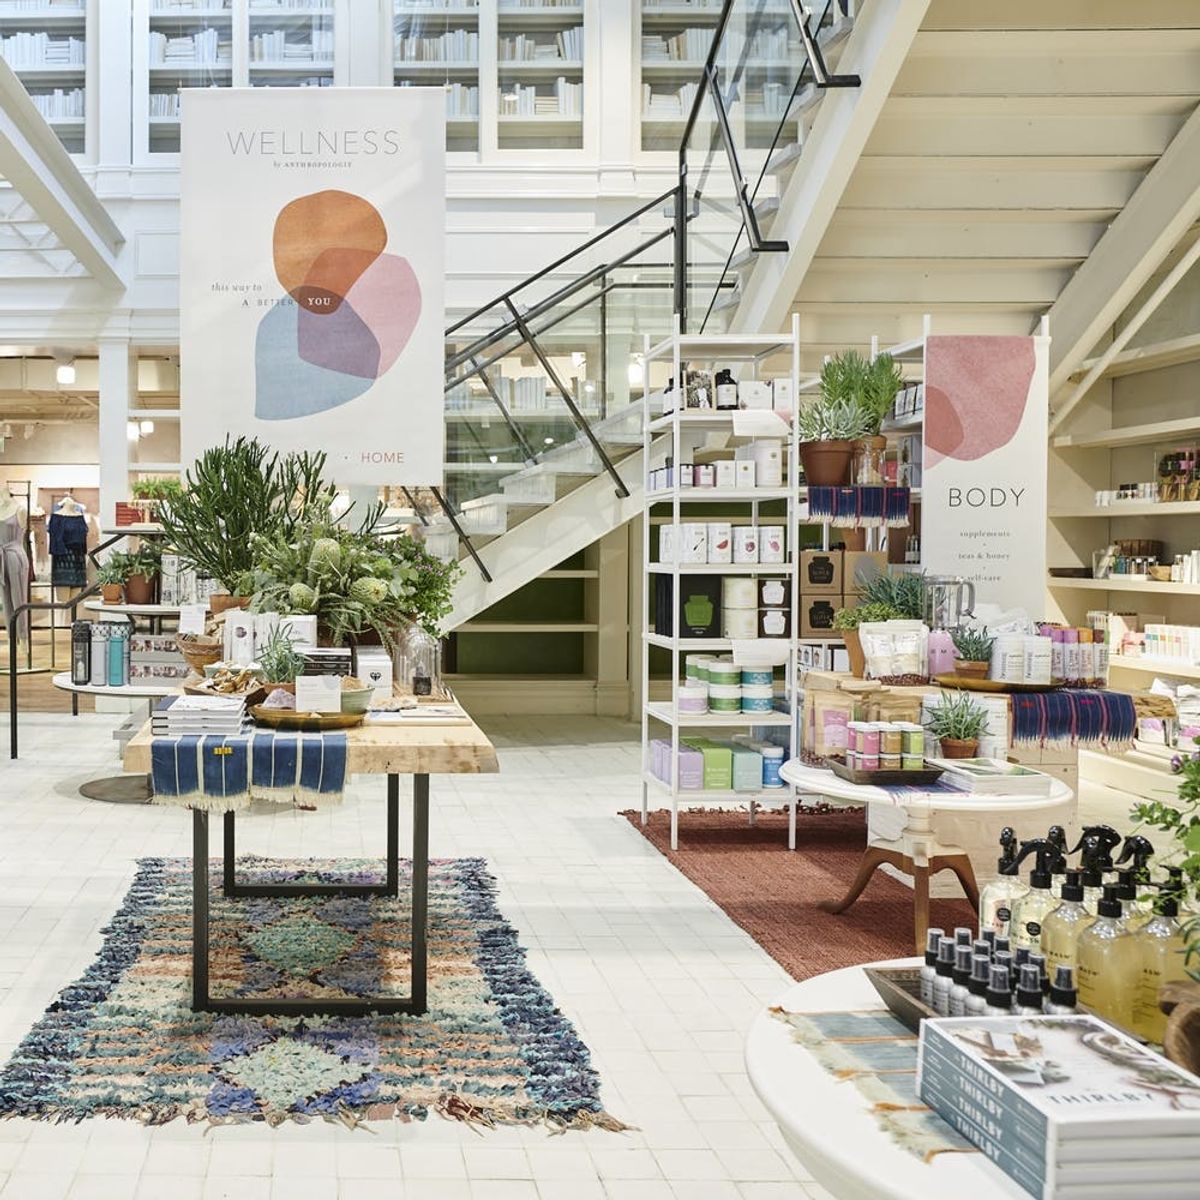 Anthropologie Is Launching a Wellness Shop That Stocks Gorgeous #Shelfie Products